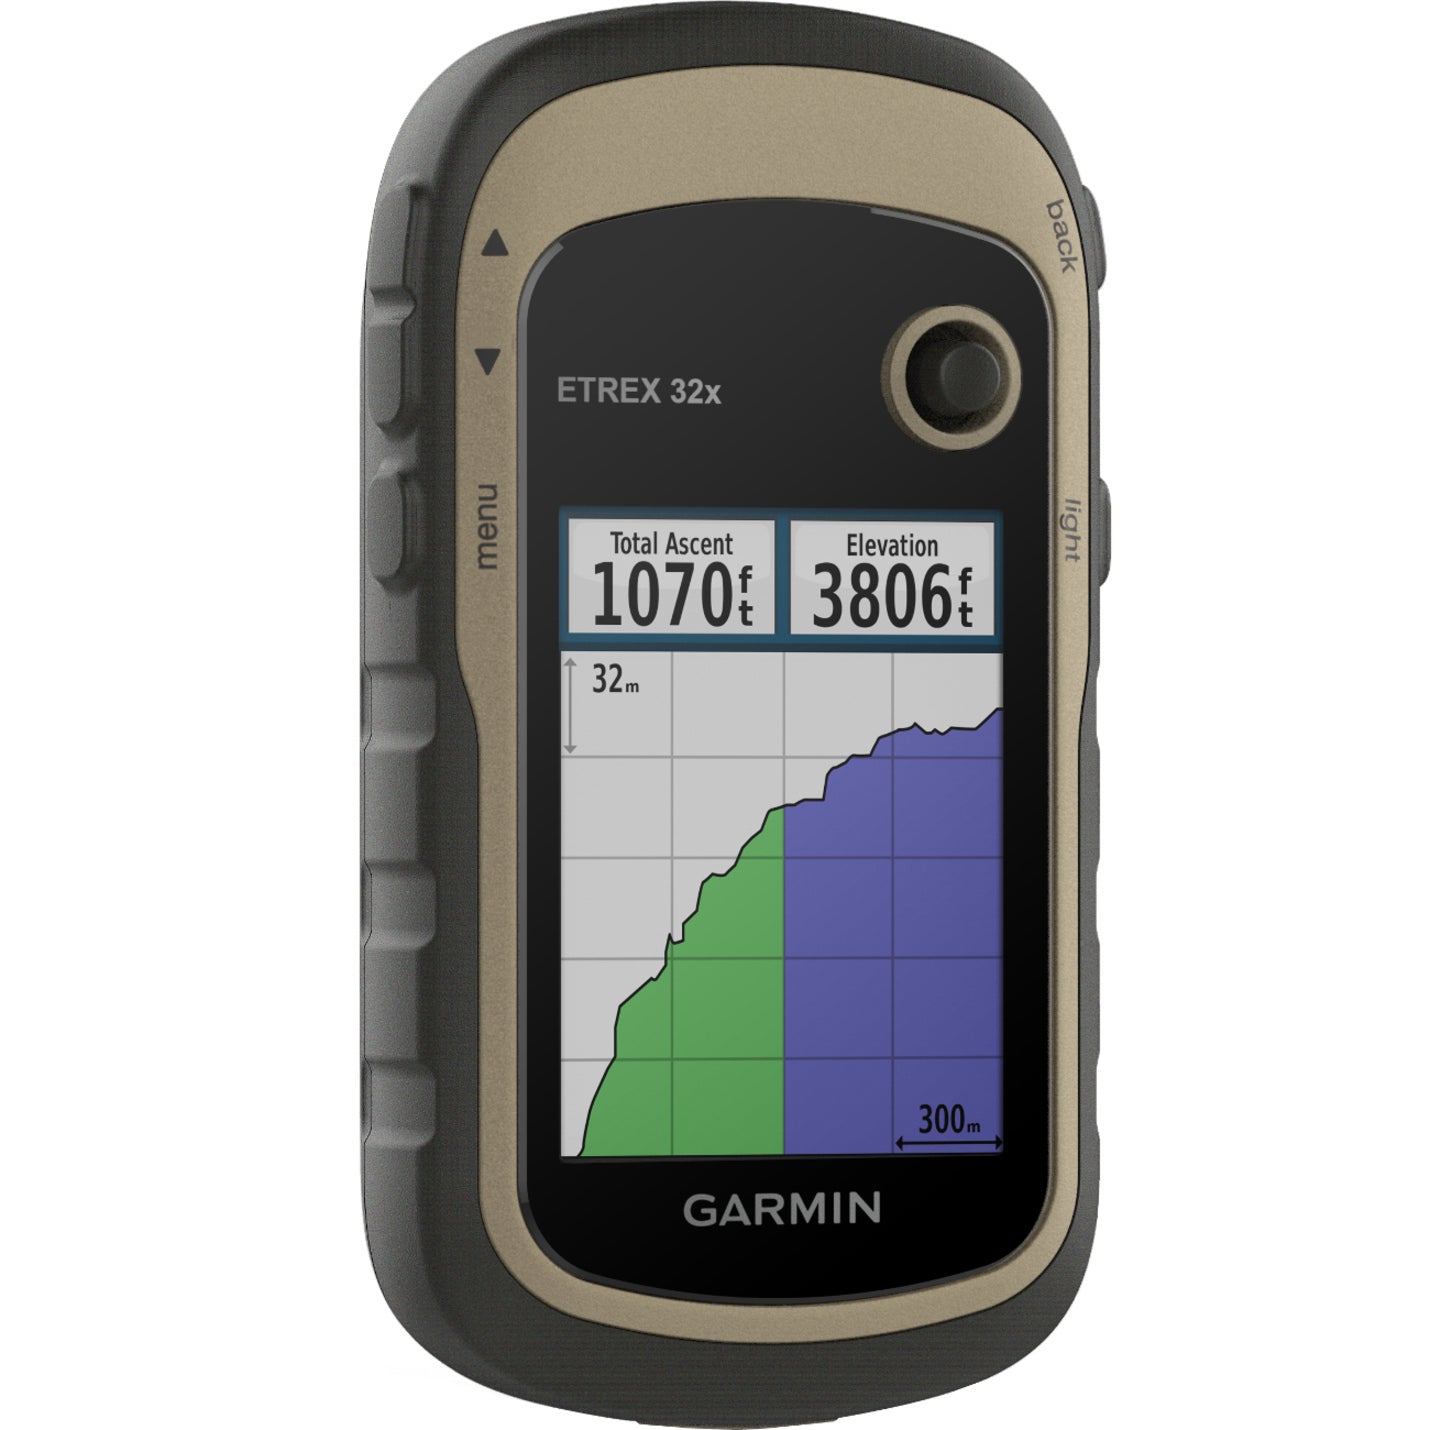 Garmin 010-02257-00 eTrex 32x Rugged Handheld GPS with Compass and Barometric Altimeter, 2.2" Color Display, Preloaded Maps